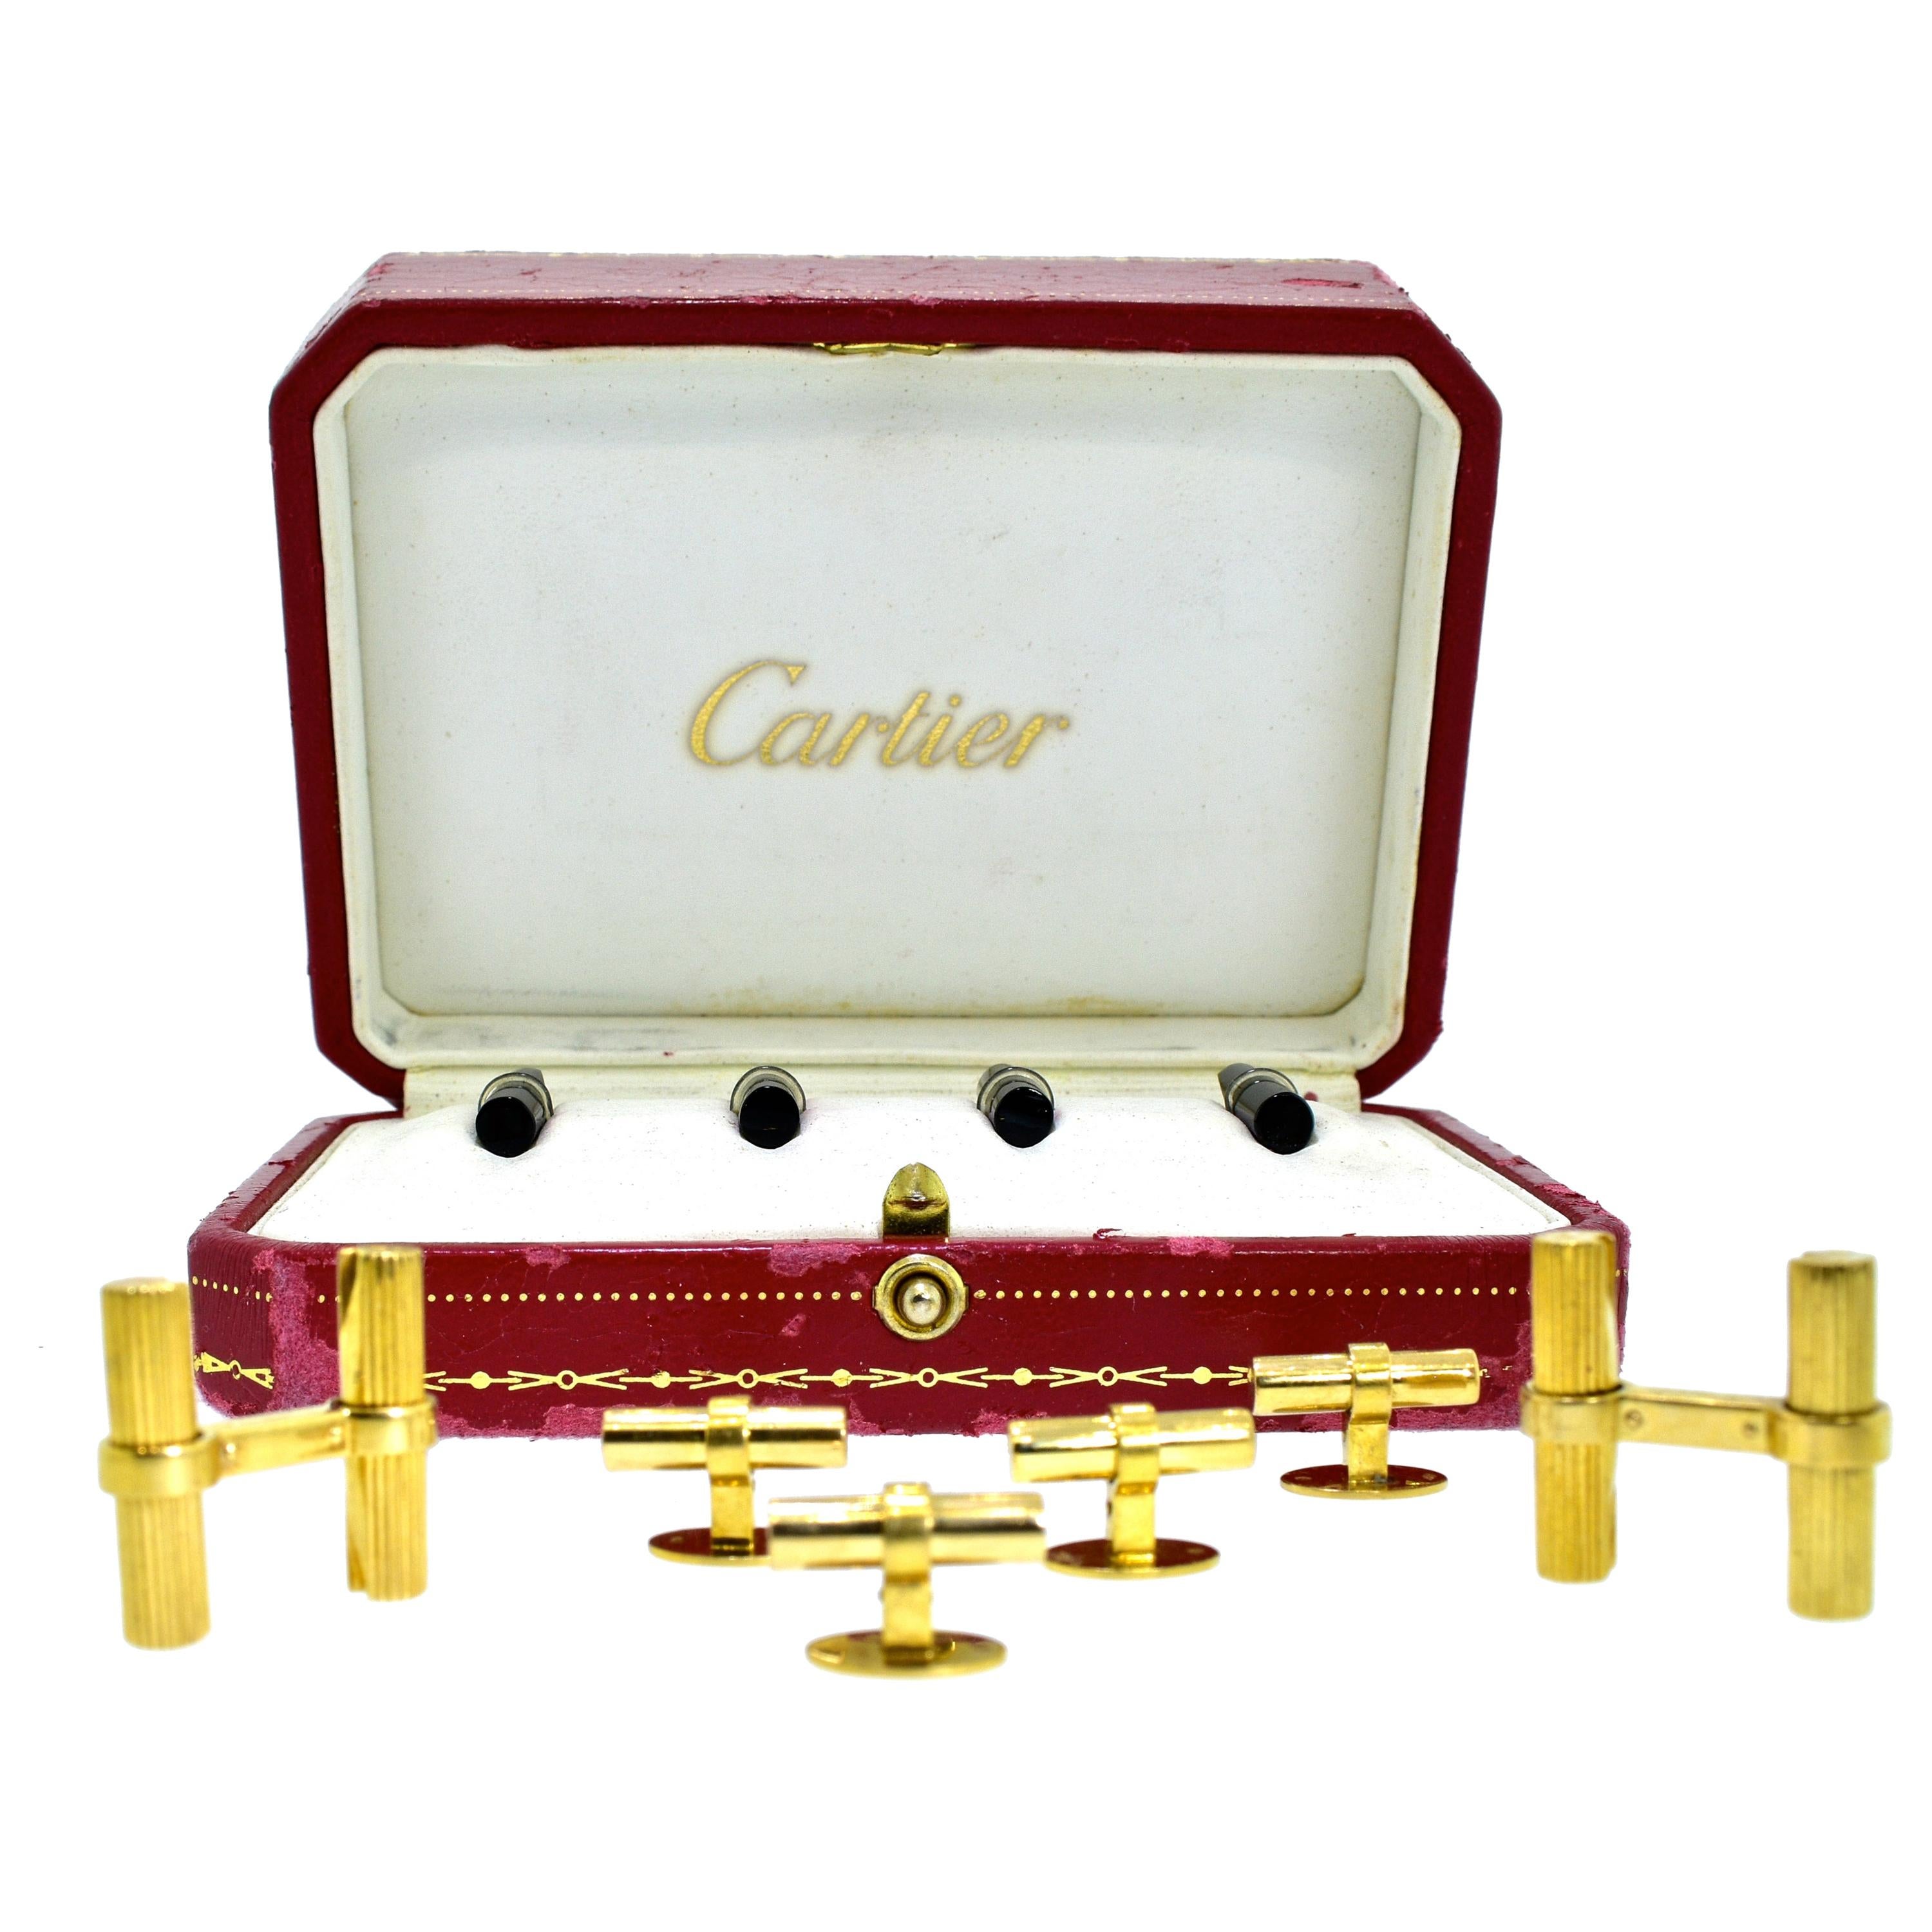 Cartier 18 Karat French Dress Set in Gold, Onyx and Rock Crystal, circa 1960